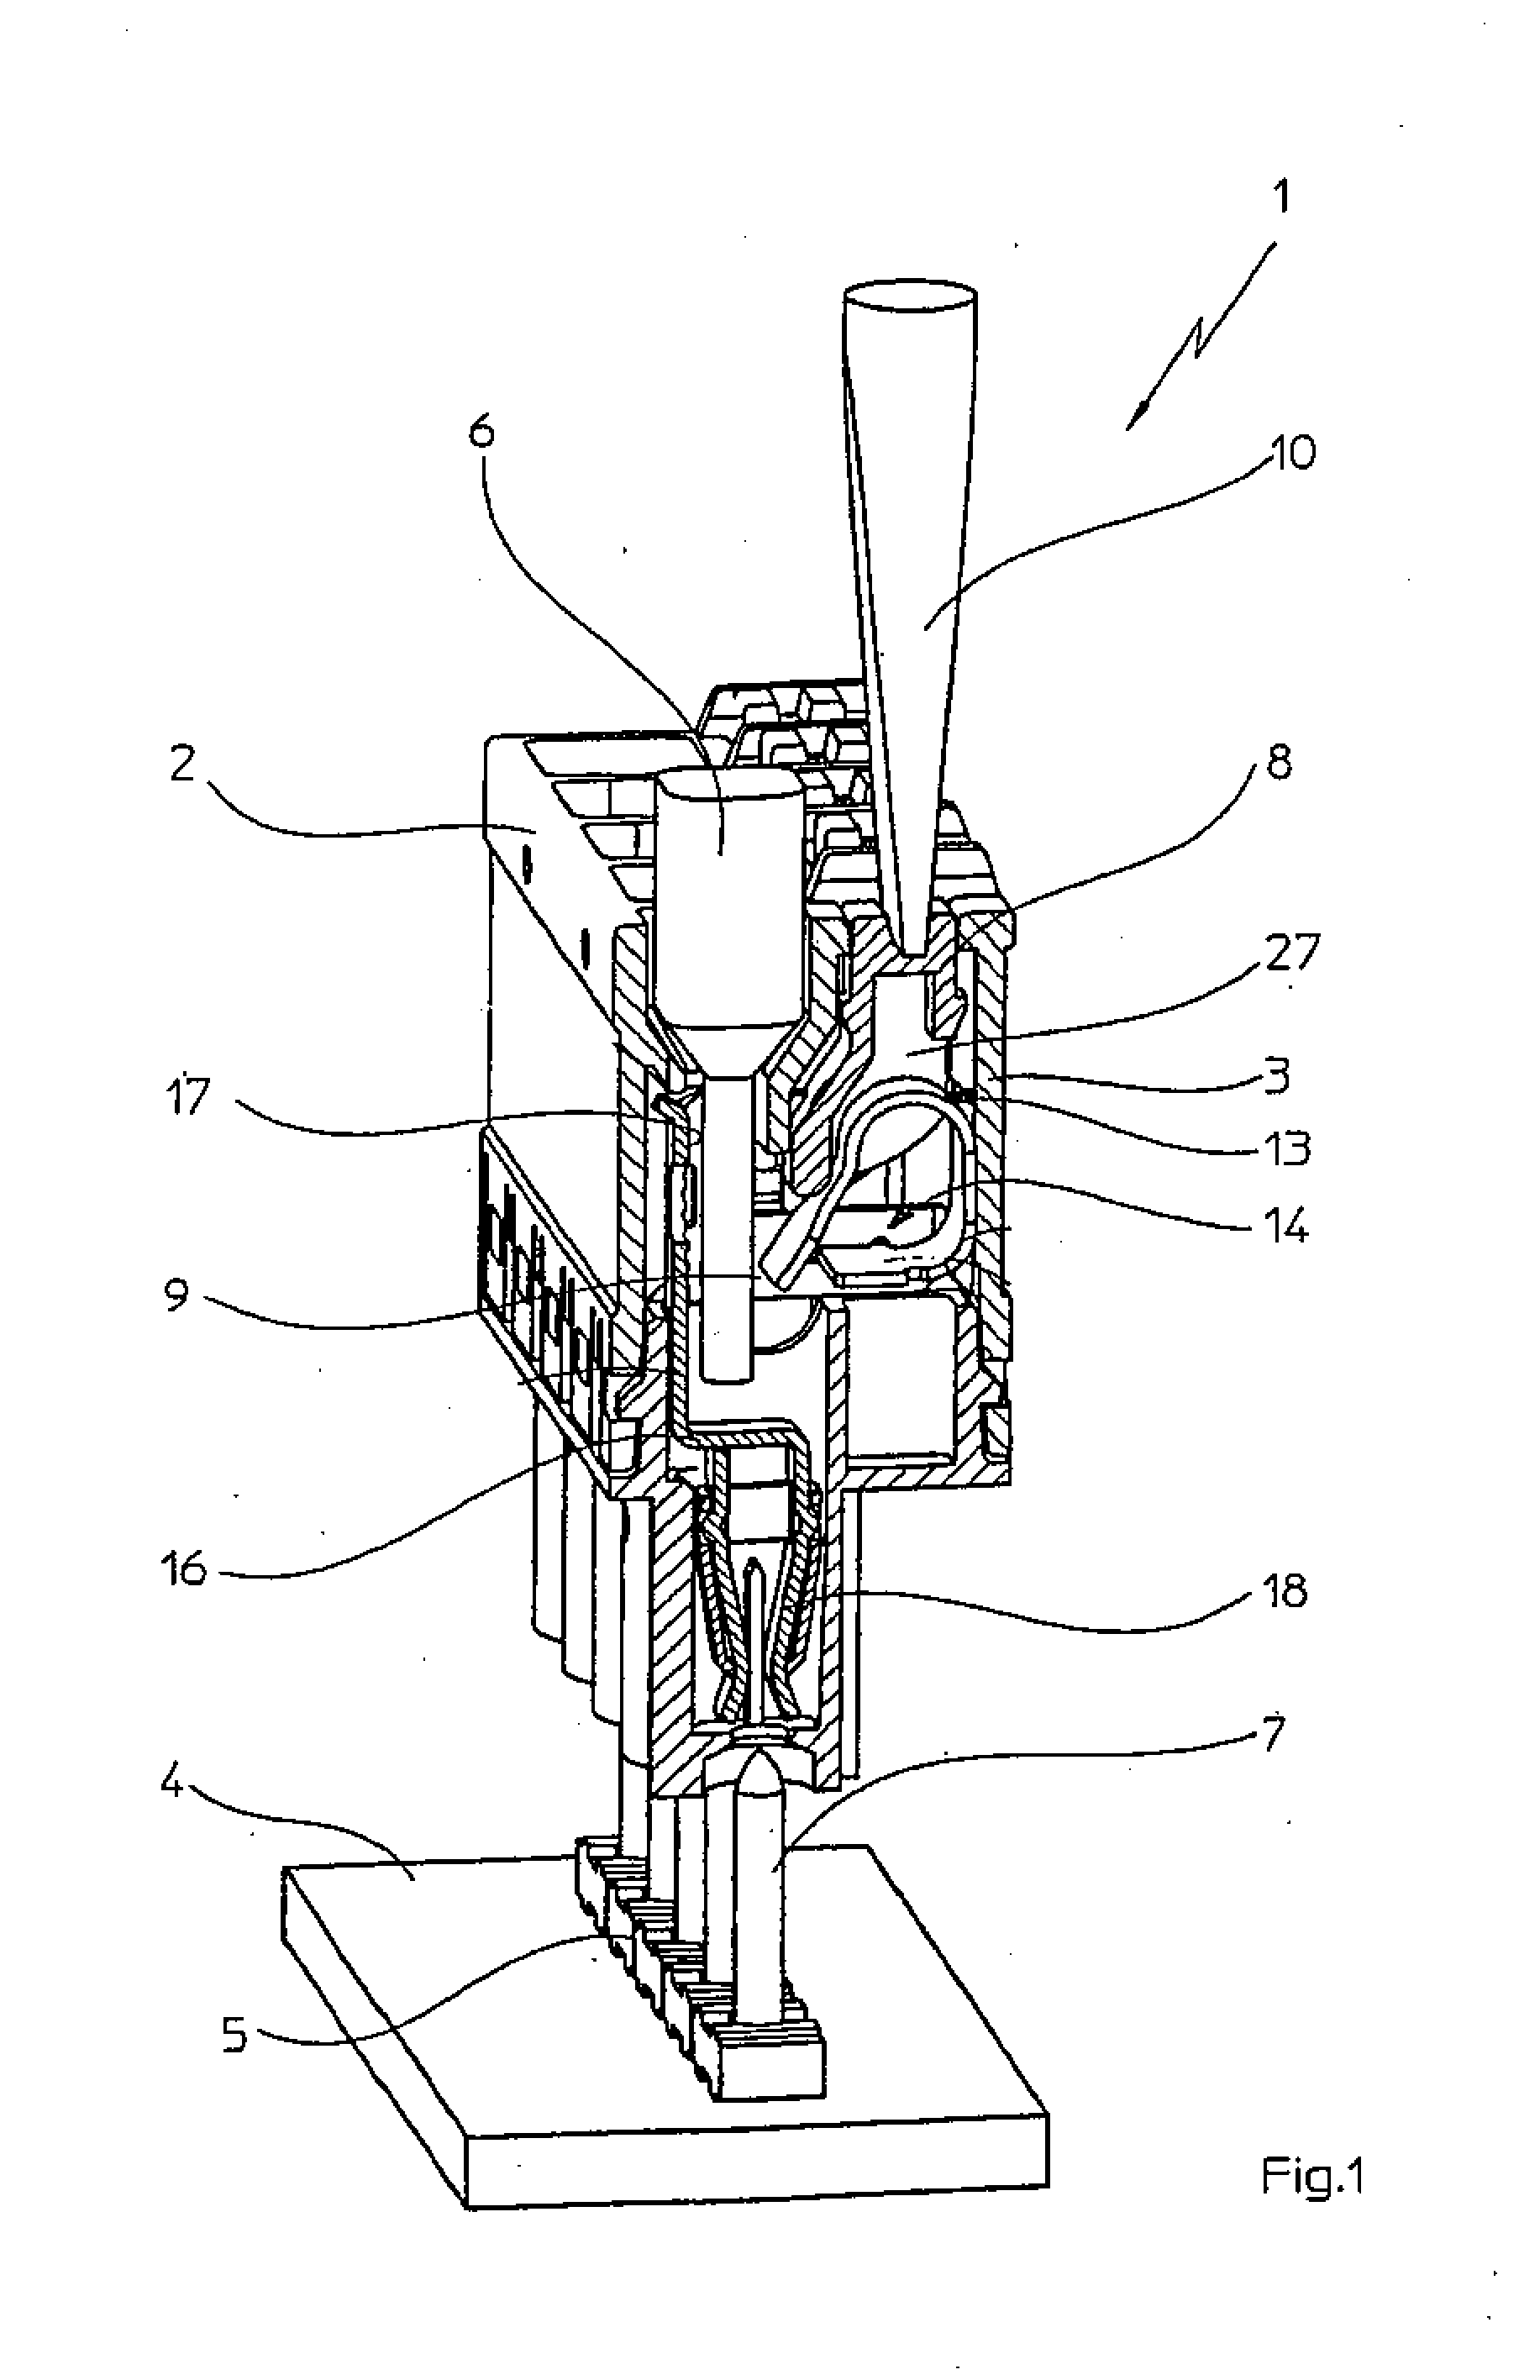 Connecting terminal for printed circuit boards